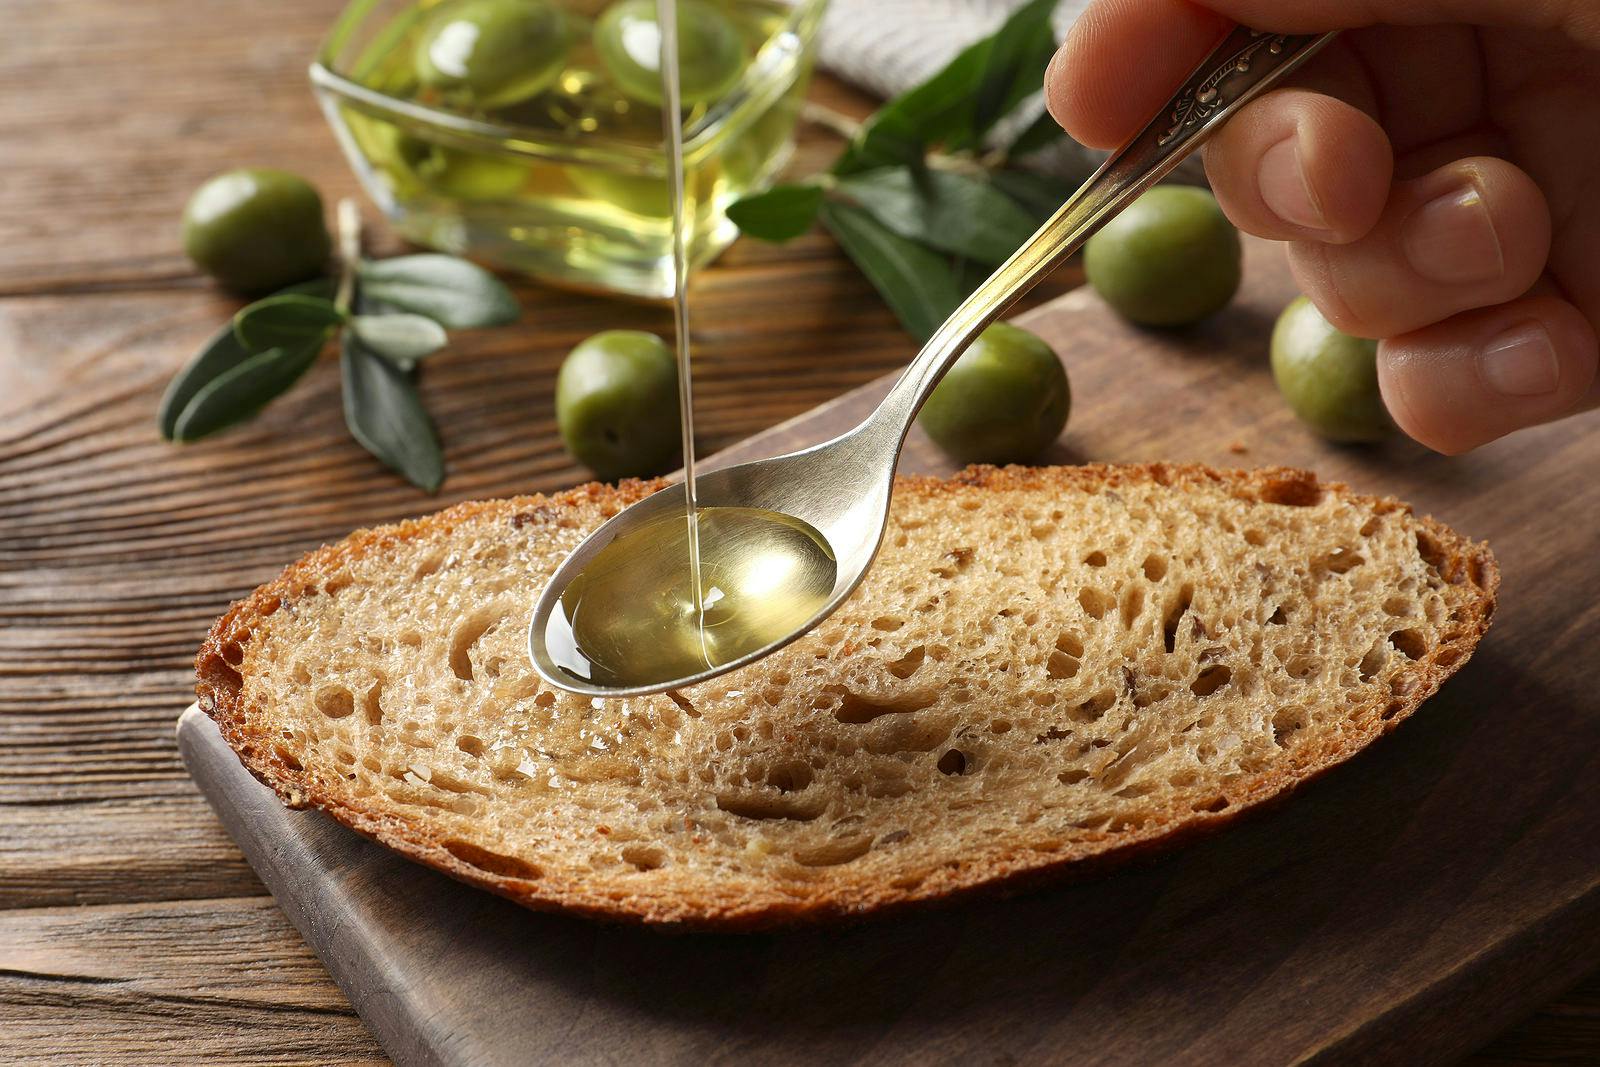 pouring olive oil onto spoon over a slice of bread